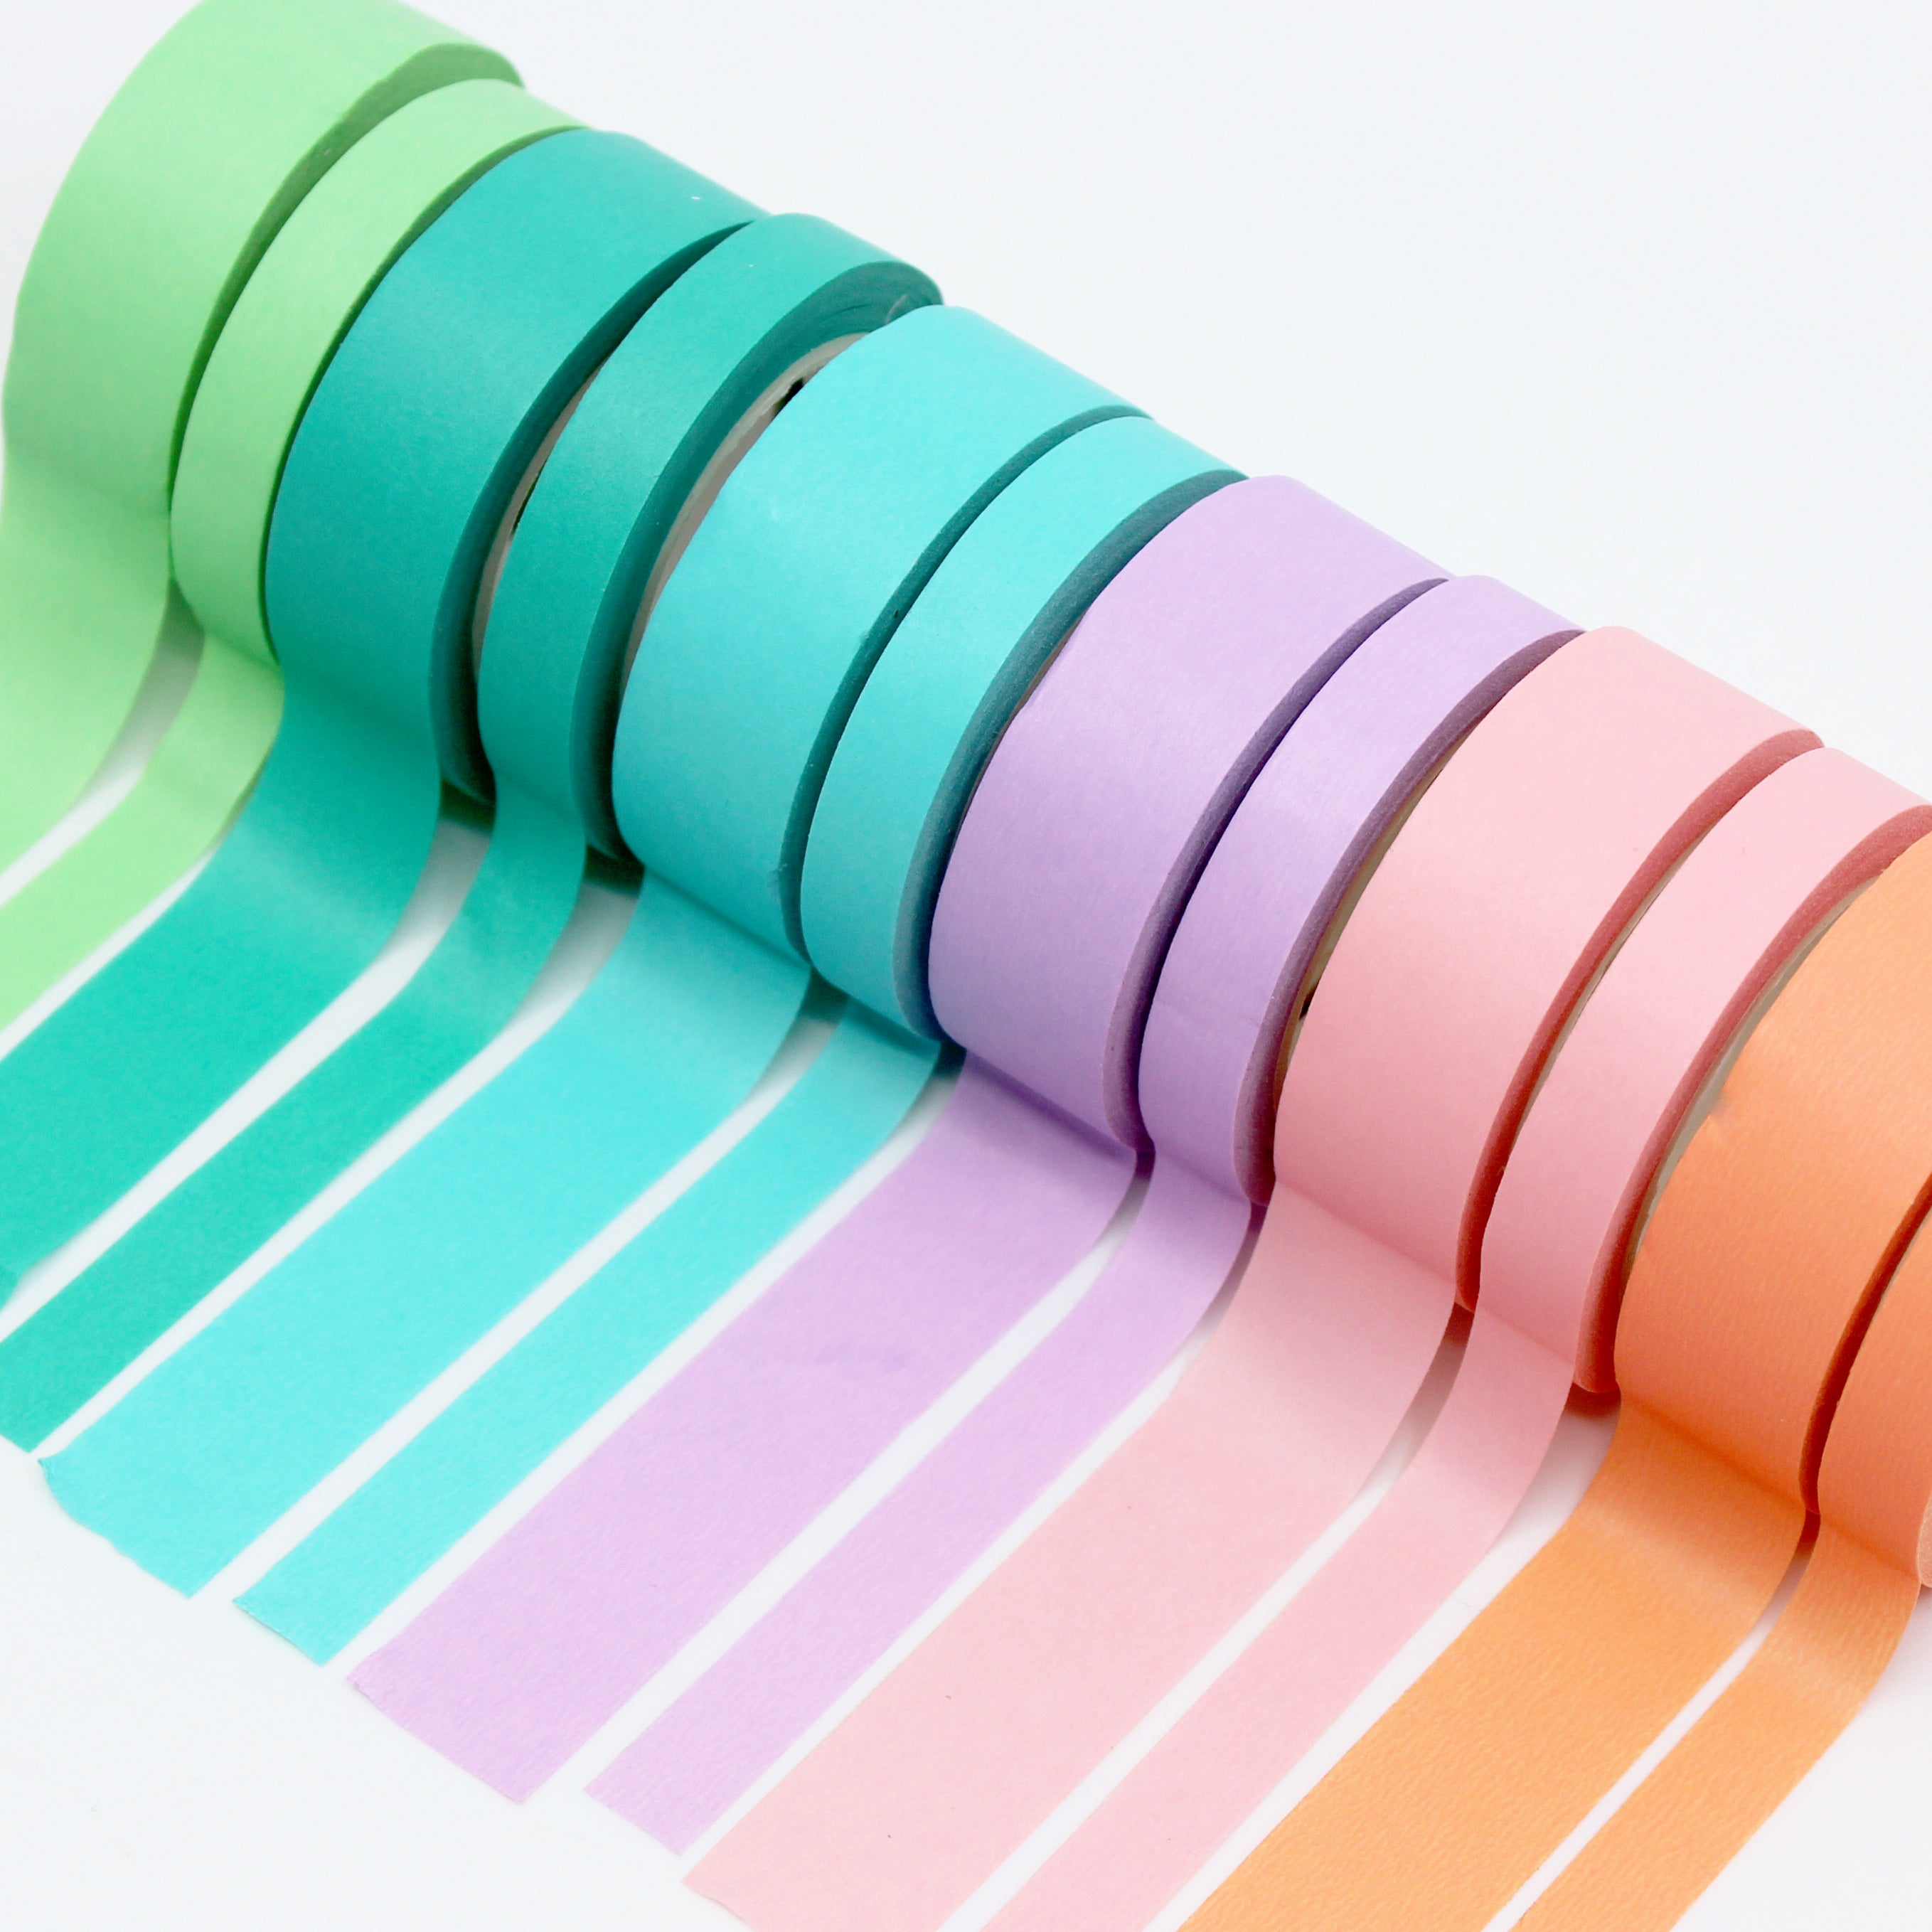 This pastel lavender purple washi tape is vibrant and fun. This washi tape is part of our solid neon thick-thin matching duo washi collection. Find the perfect color for any project in BBB Supplies' thick-thin solids collection, from neon to neutral to pastel and more. This tape is sold at BBB Supplies Craft Shop.